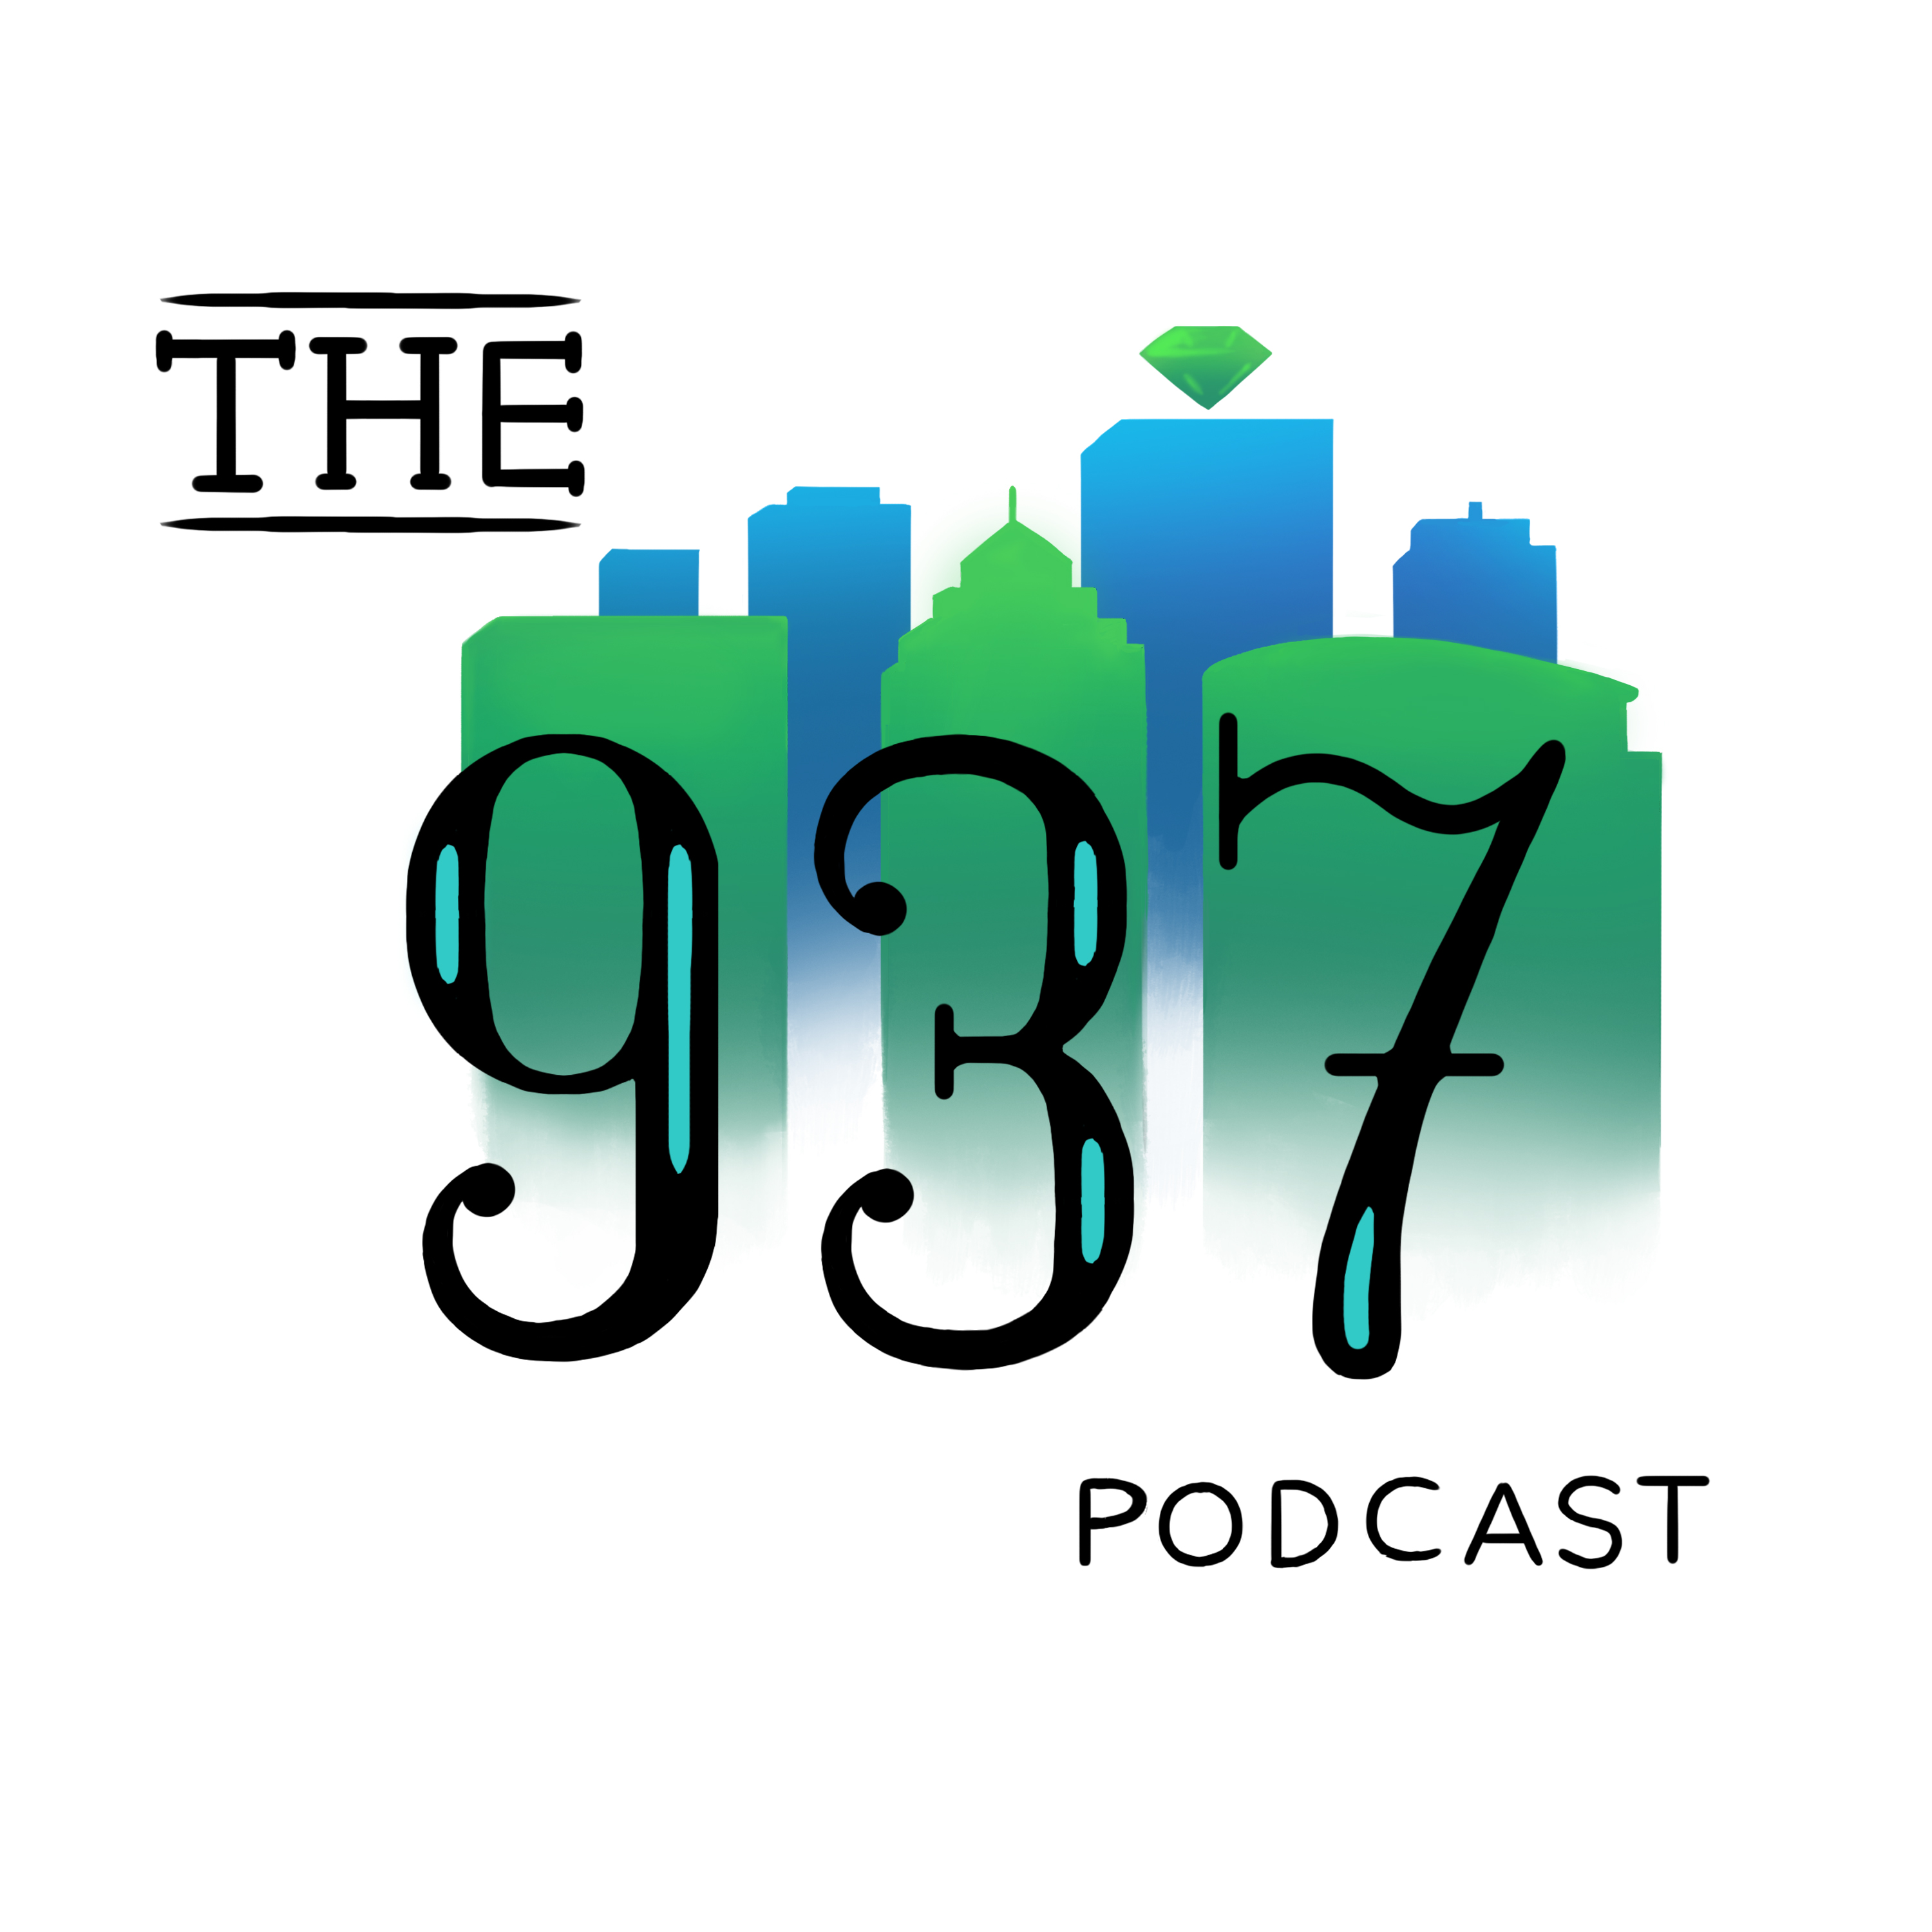 The 937 Podcast